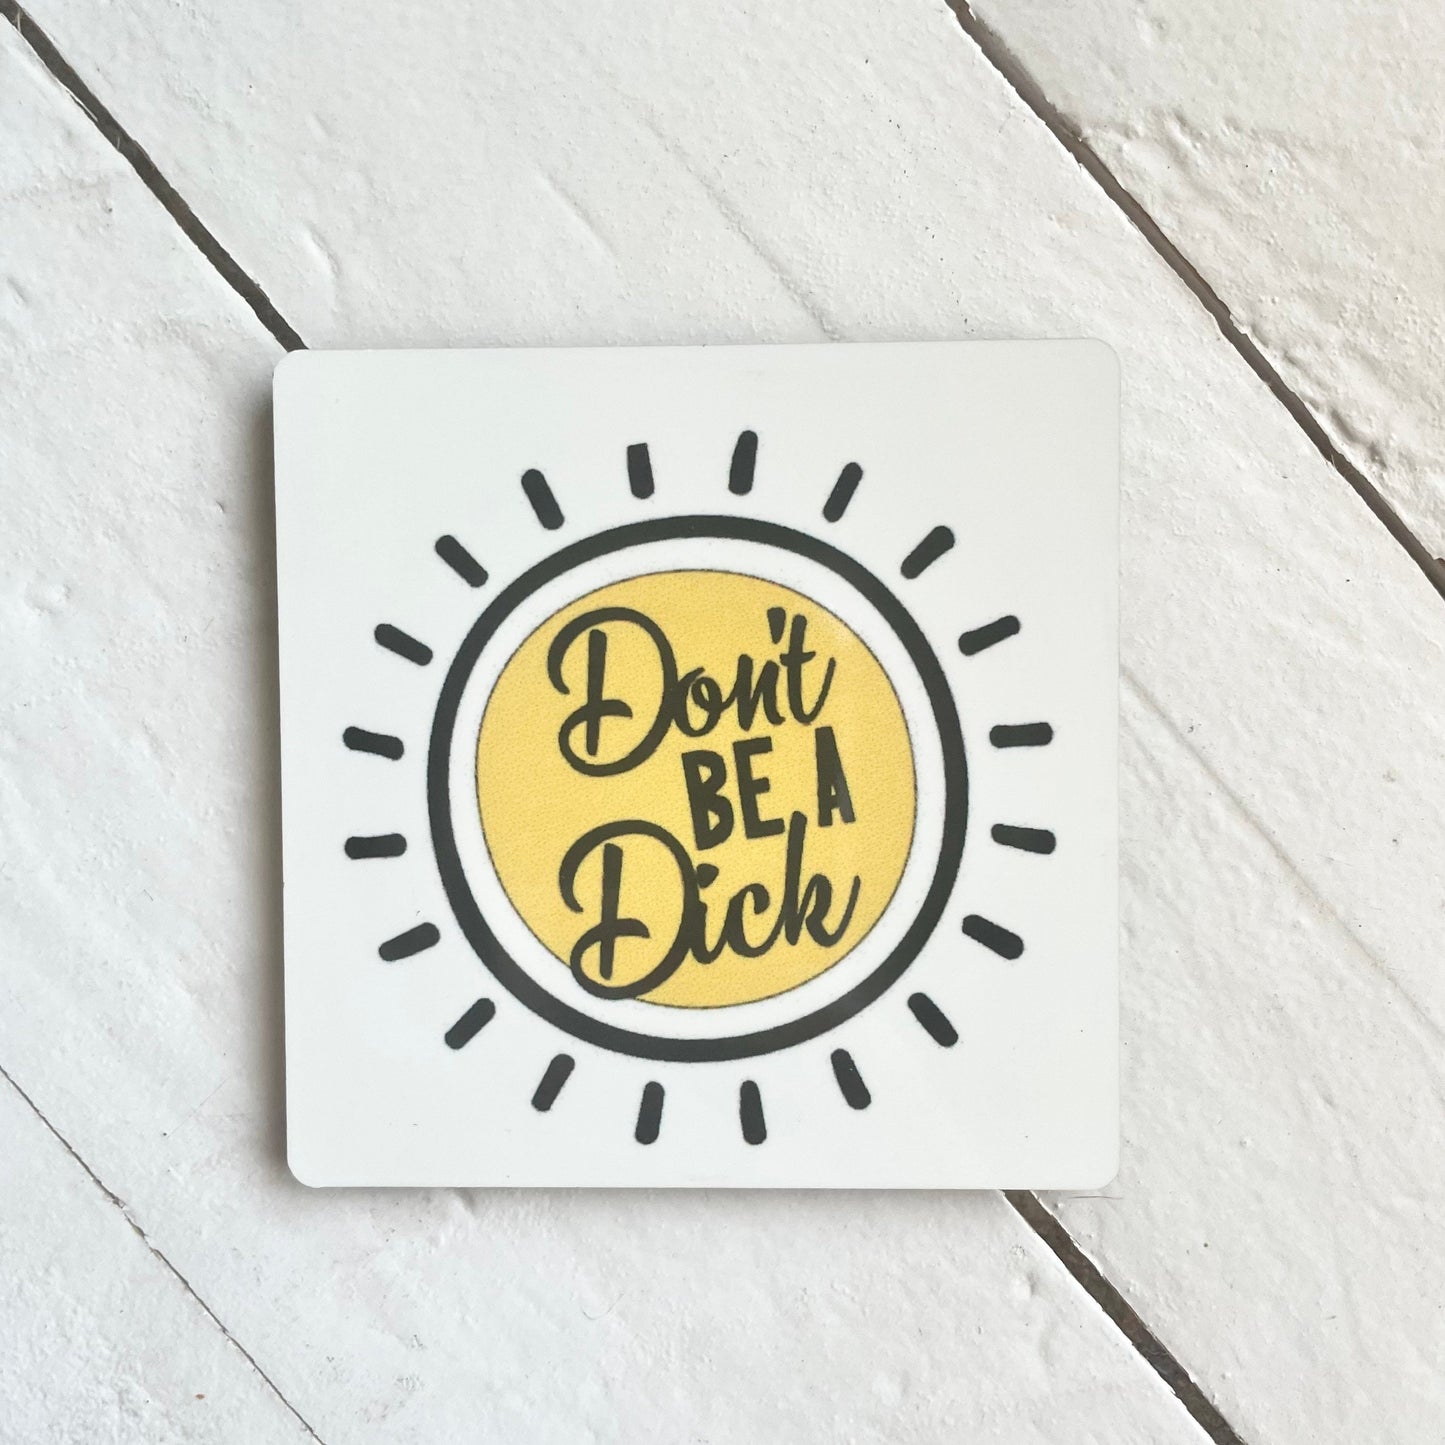 Don't Be a Dick, 3” Wood Magnet